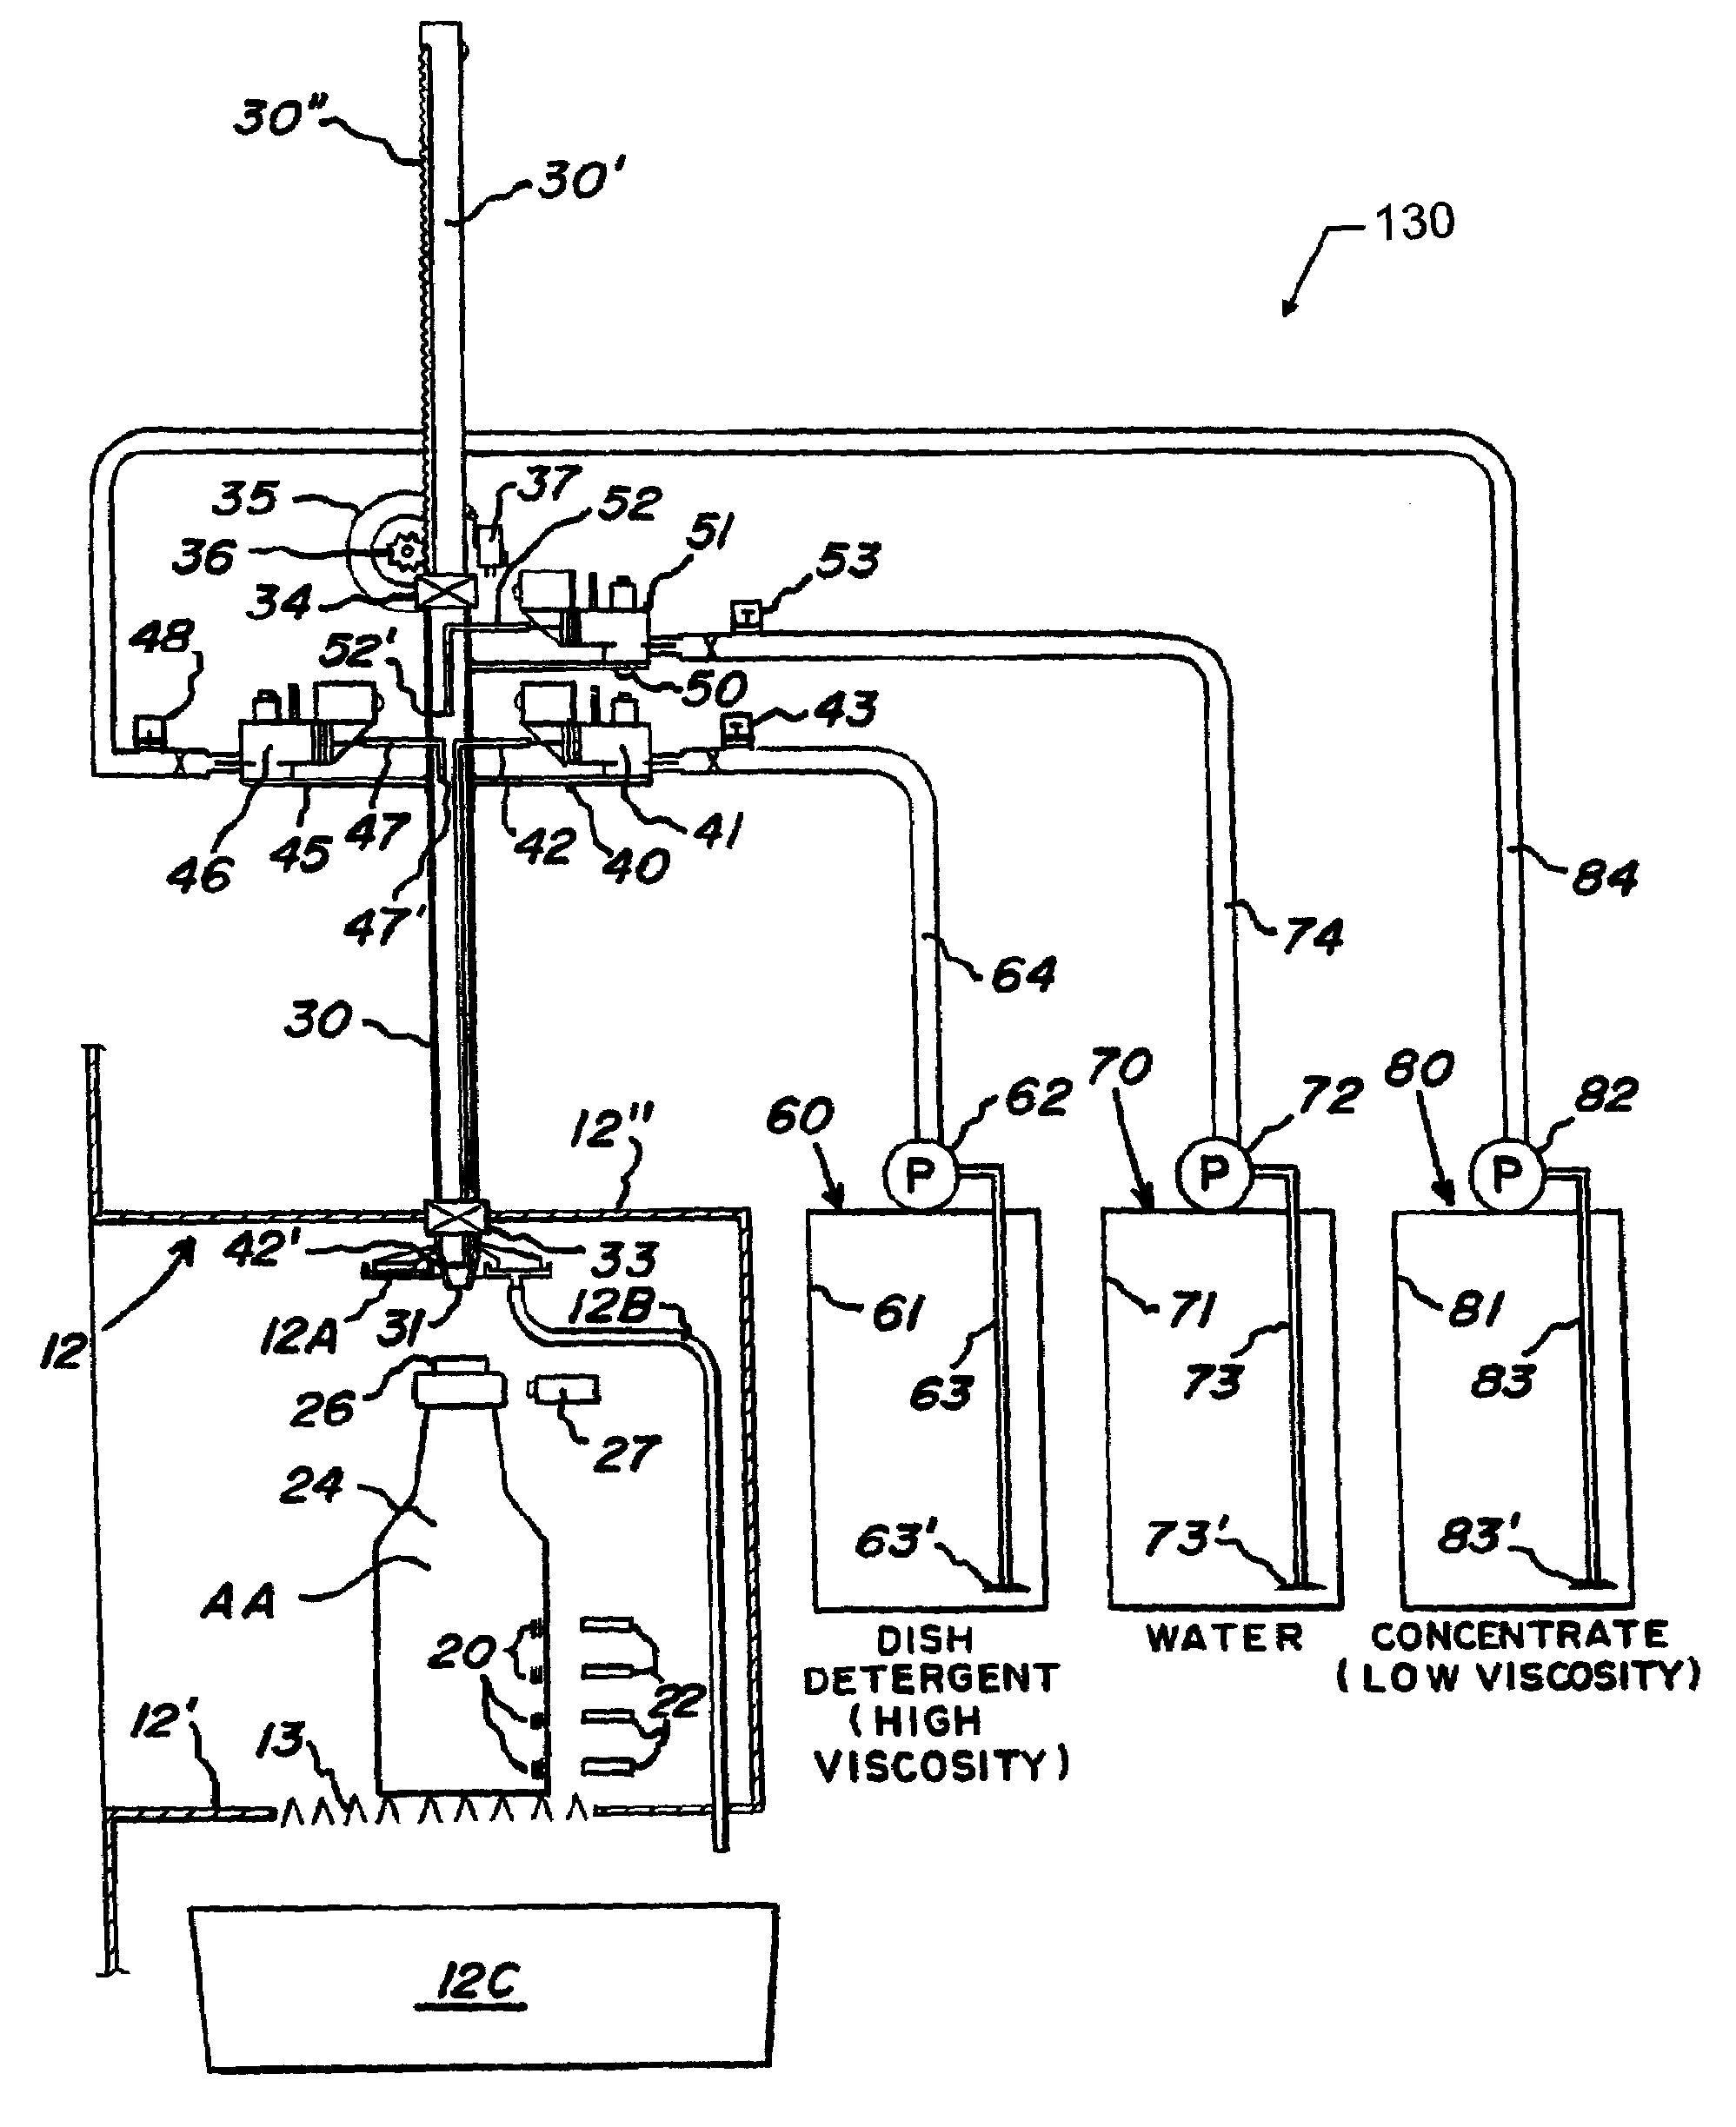 Method and apparatus for vending a containerized liquid product utilizing an automatic self-service refill system